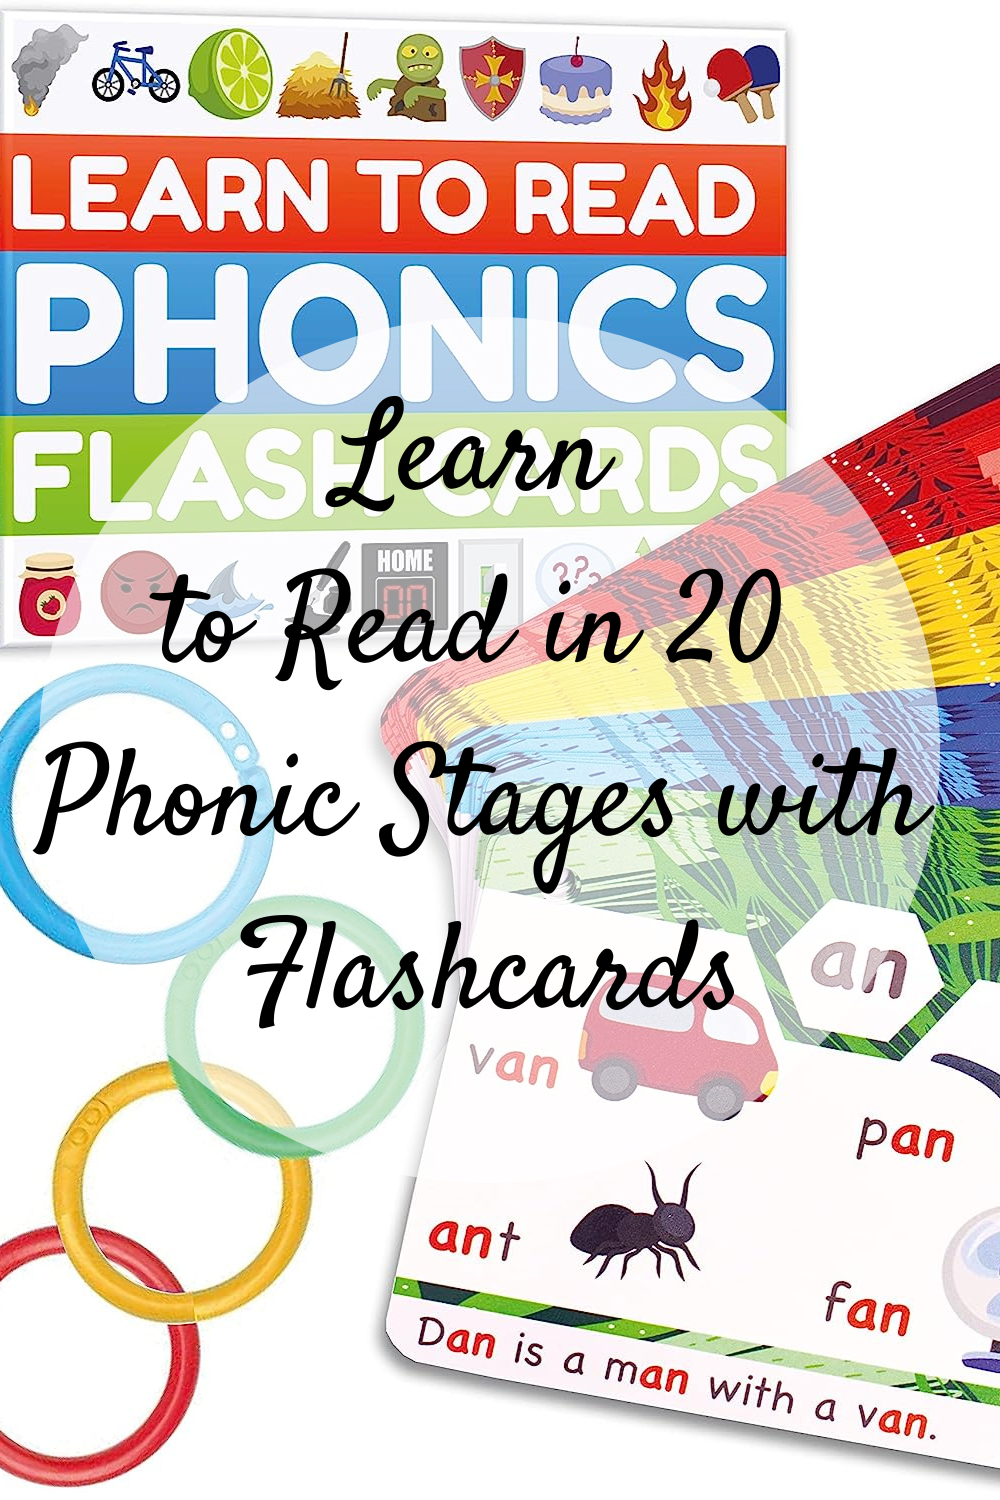 Learn to Read in 20 Phonic Stages with Flashcards - Mom and More